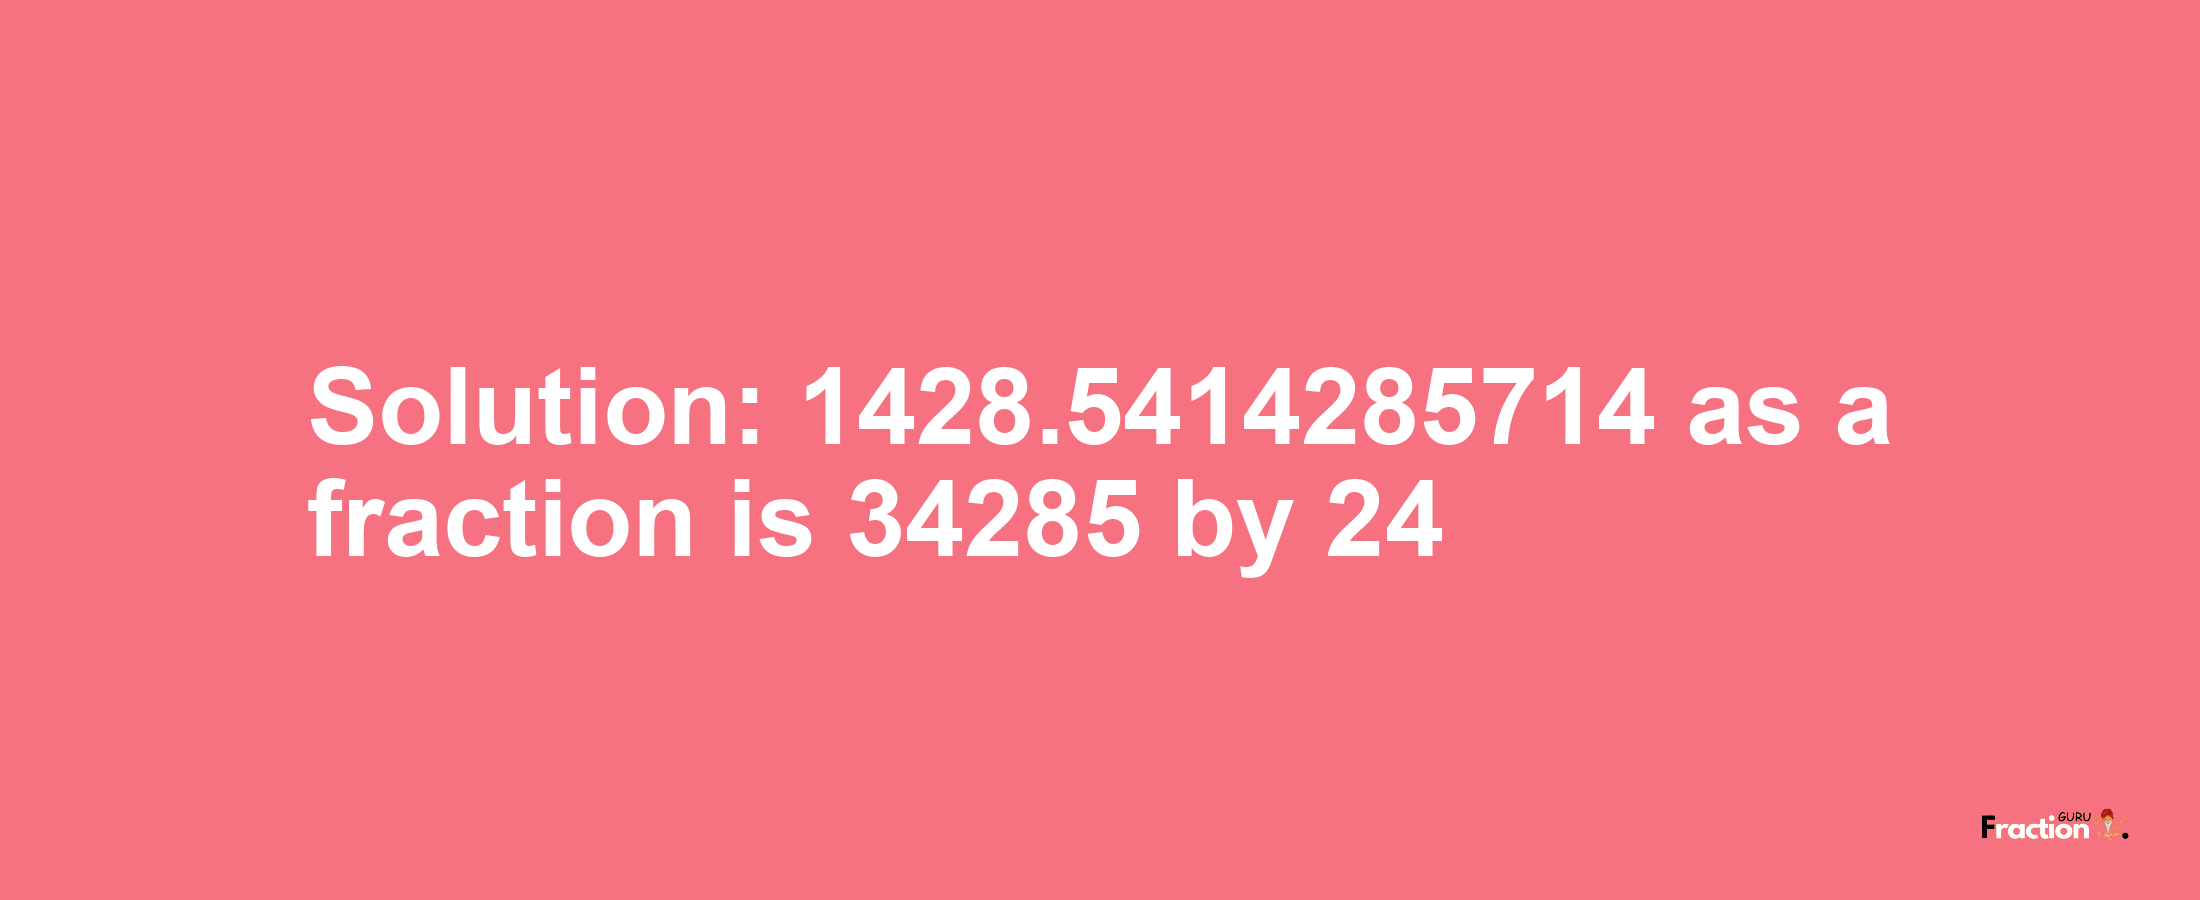 Solution:1428.5414285714 as a fraction is 34285/24